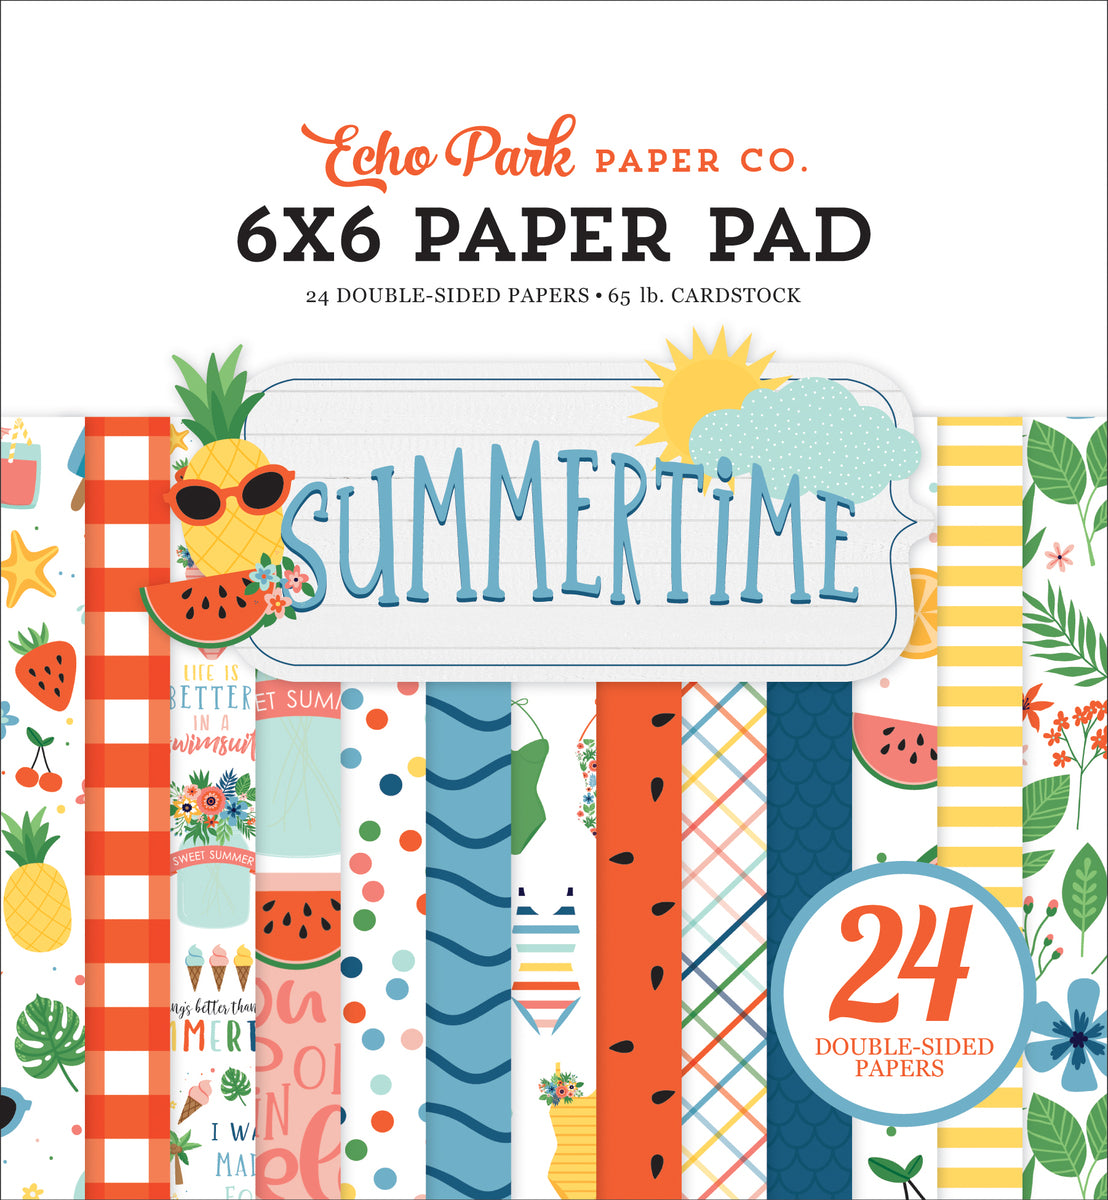 Summertime - 6x6 paper pad with 24 double-sided sheets - Echo Park Paper